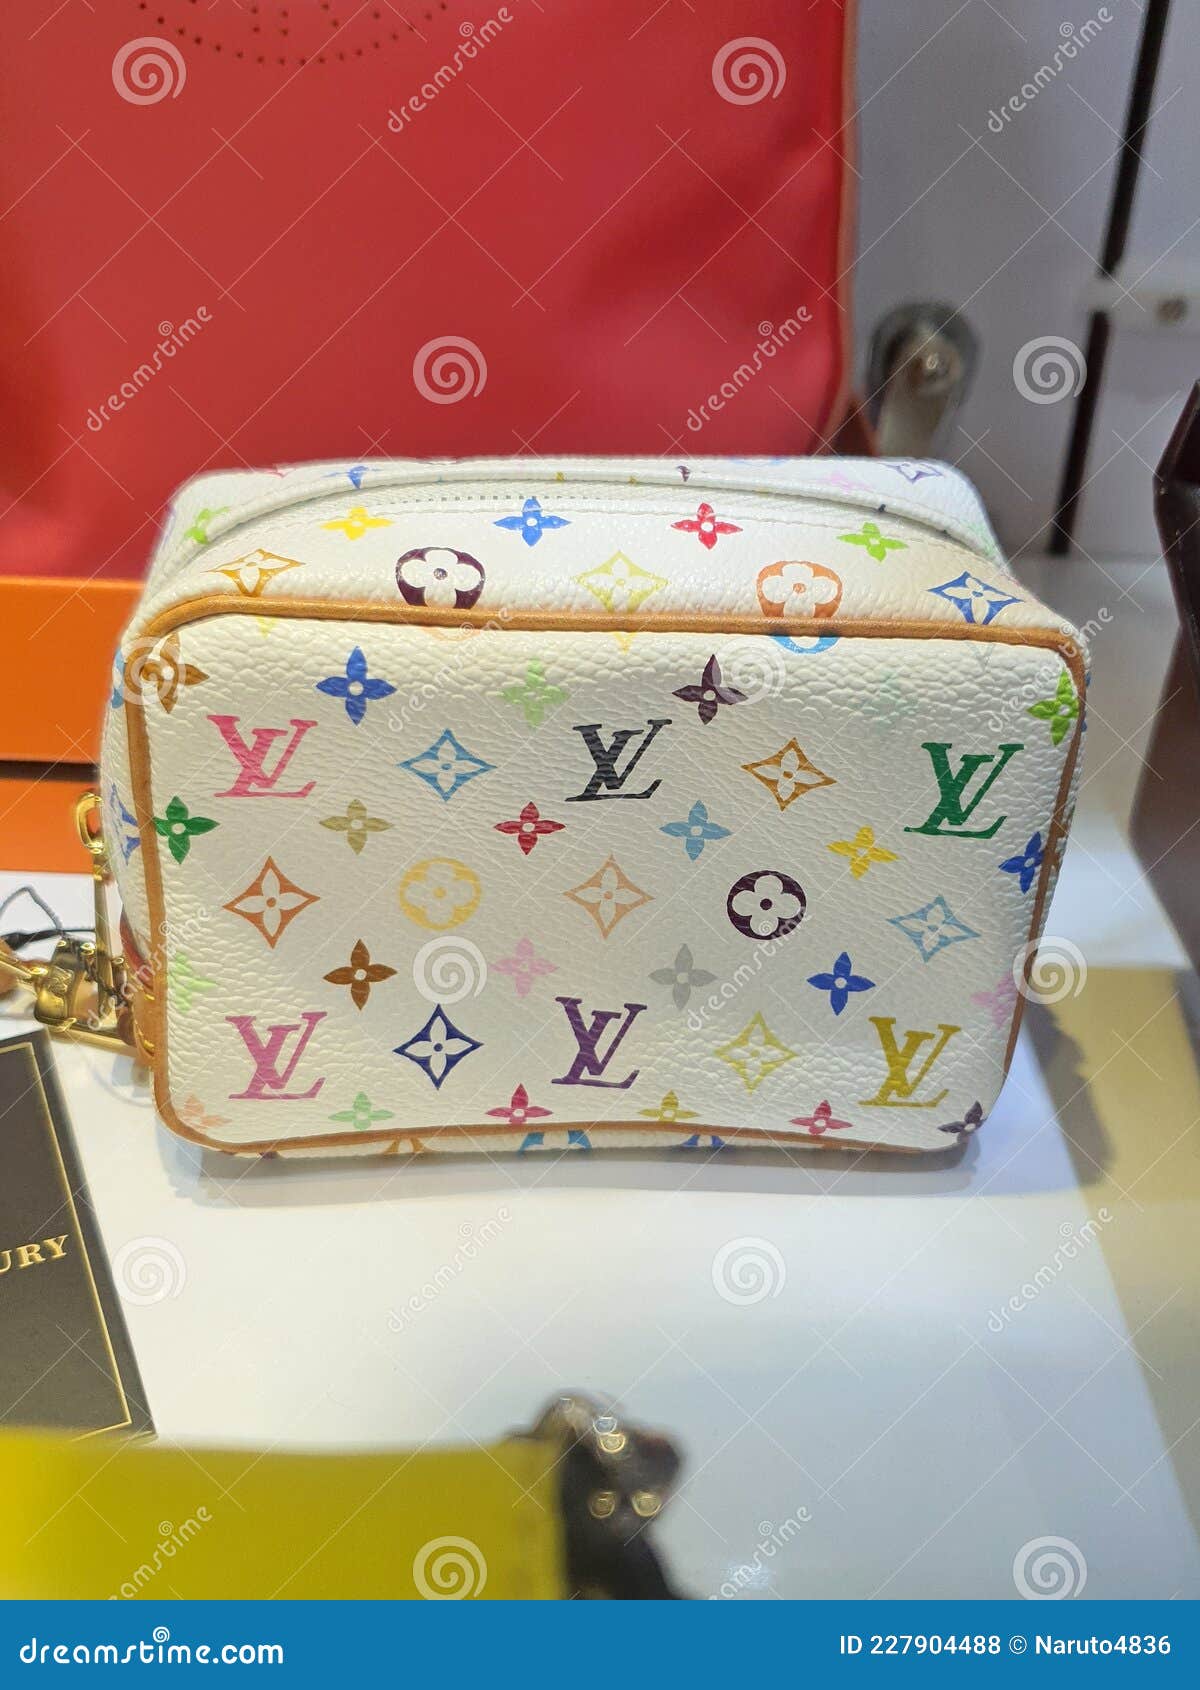 Louis Vuitton bags editorial stock photo. Image of famous - 227904488